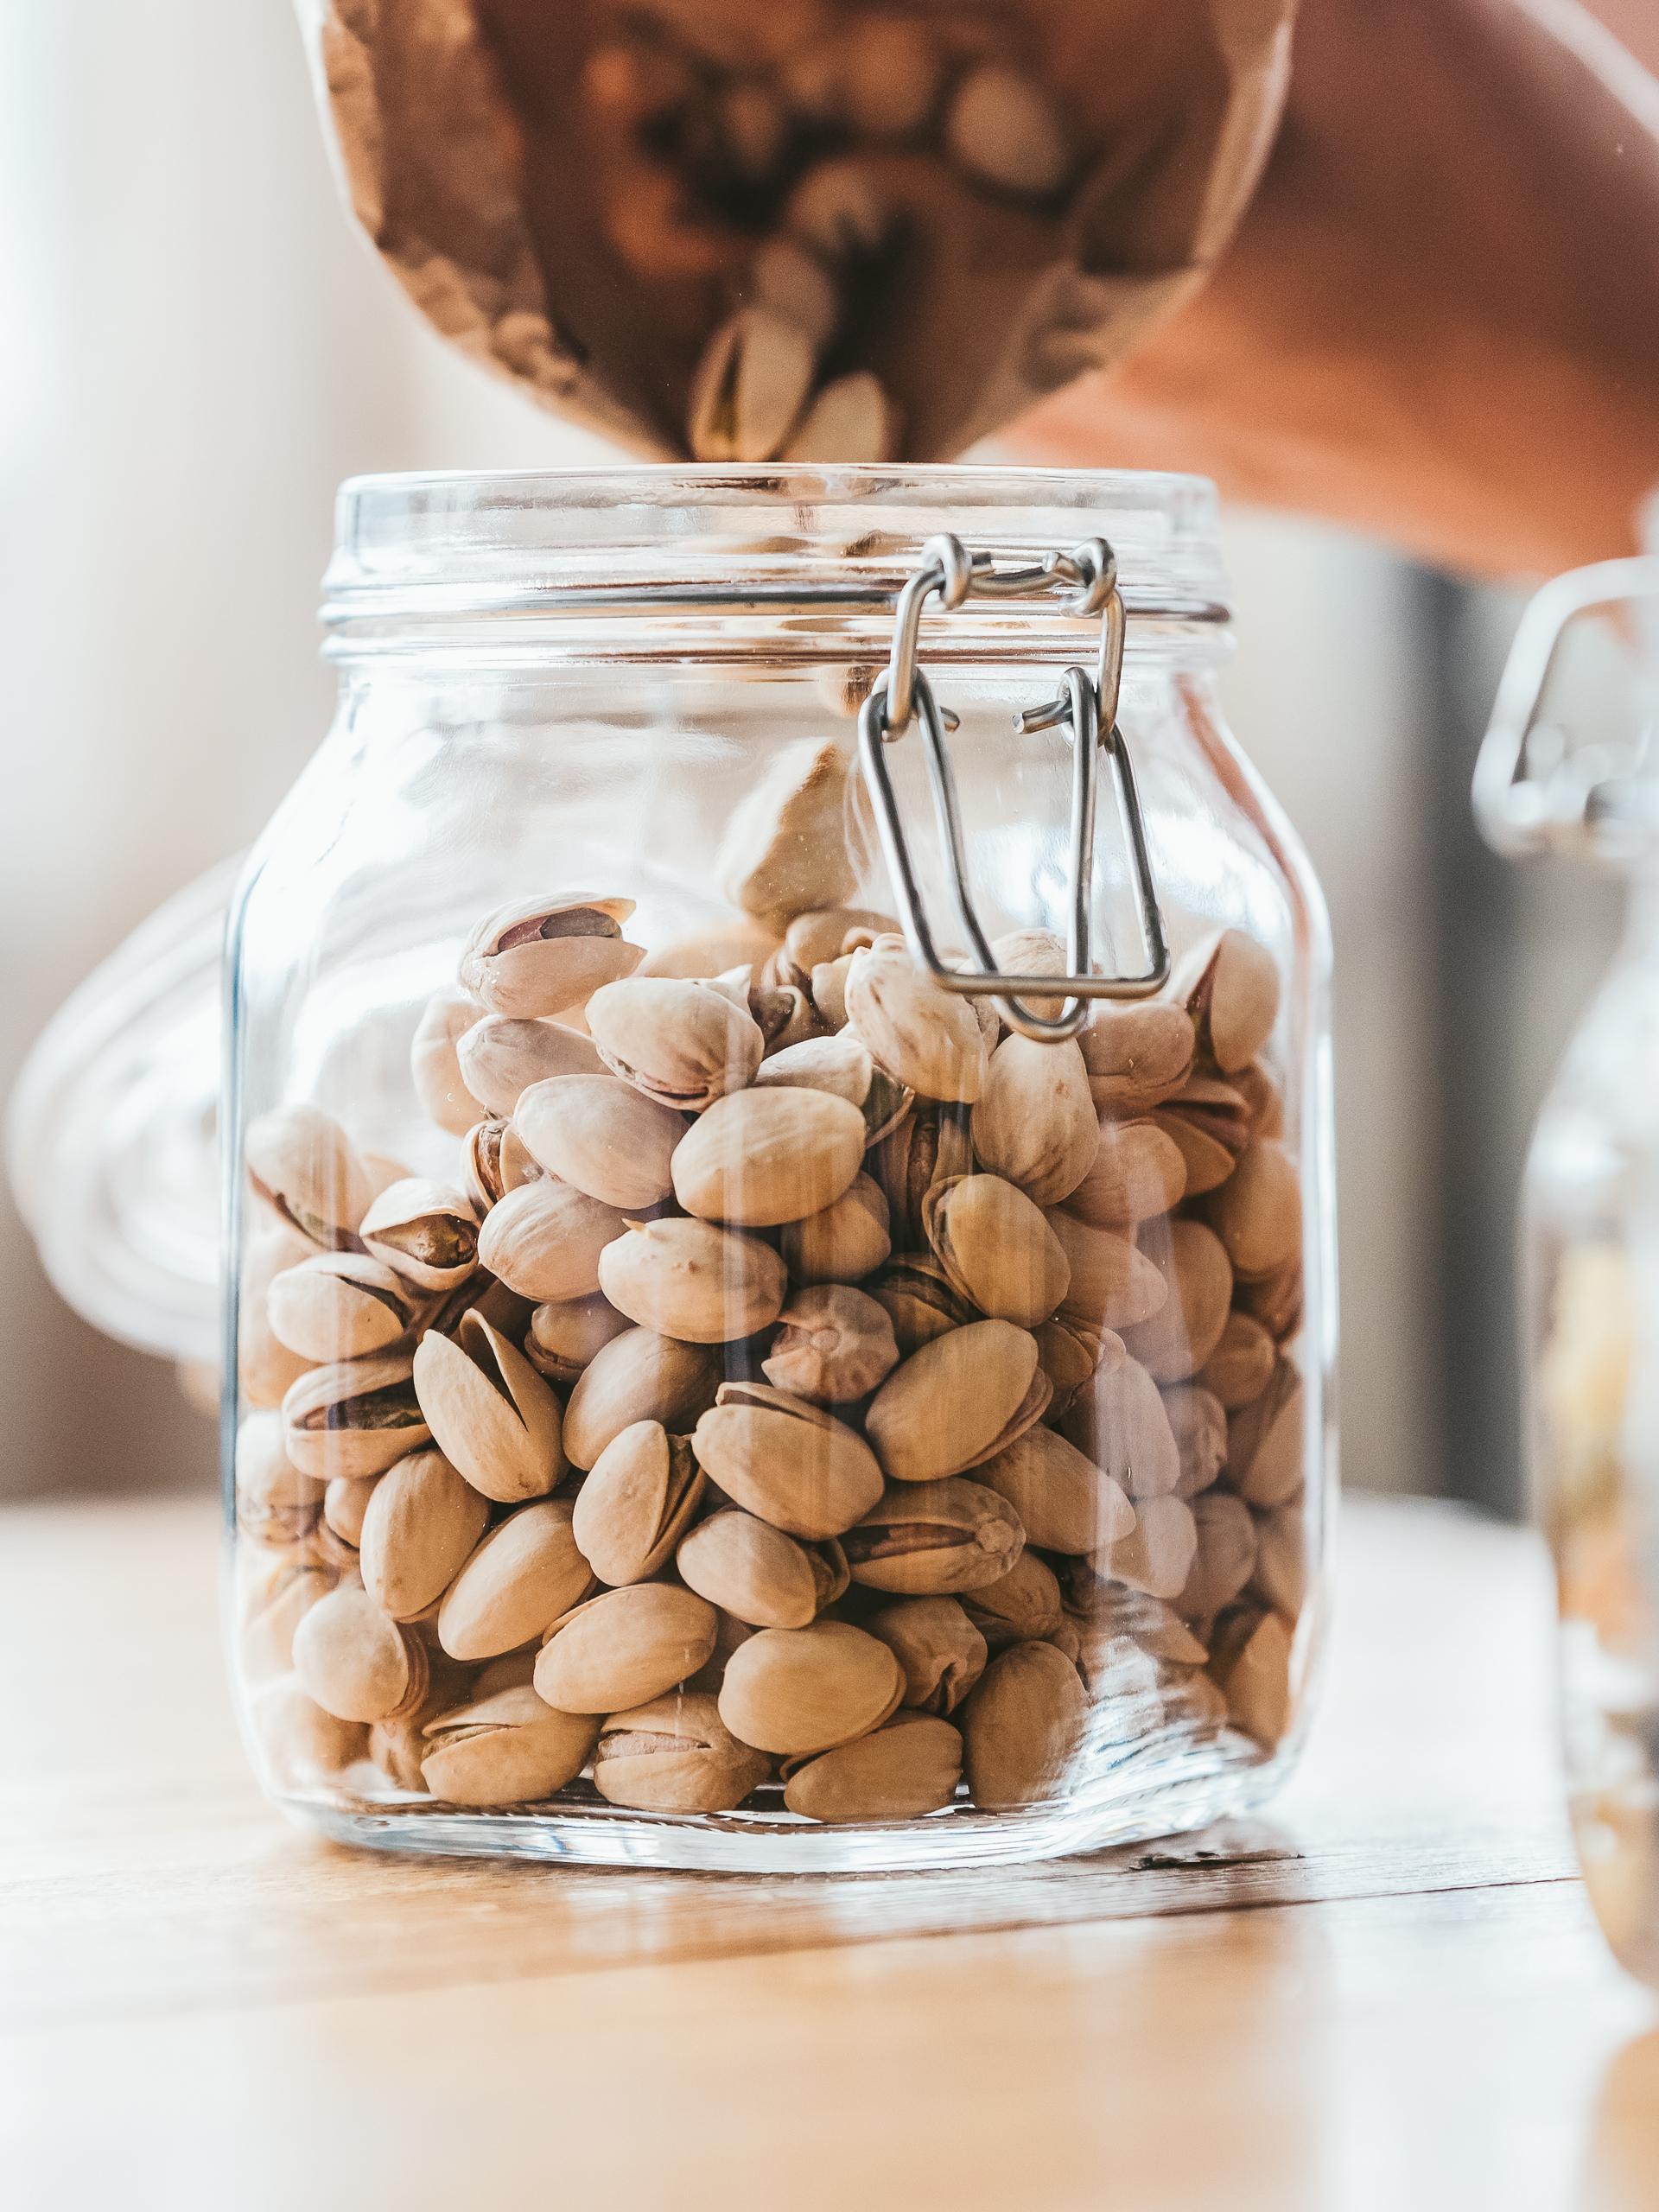 Top 3 High-Protein Nuts that Aren't Peanuts